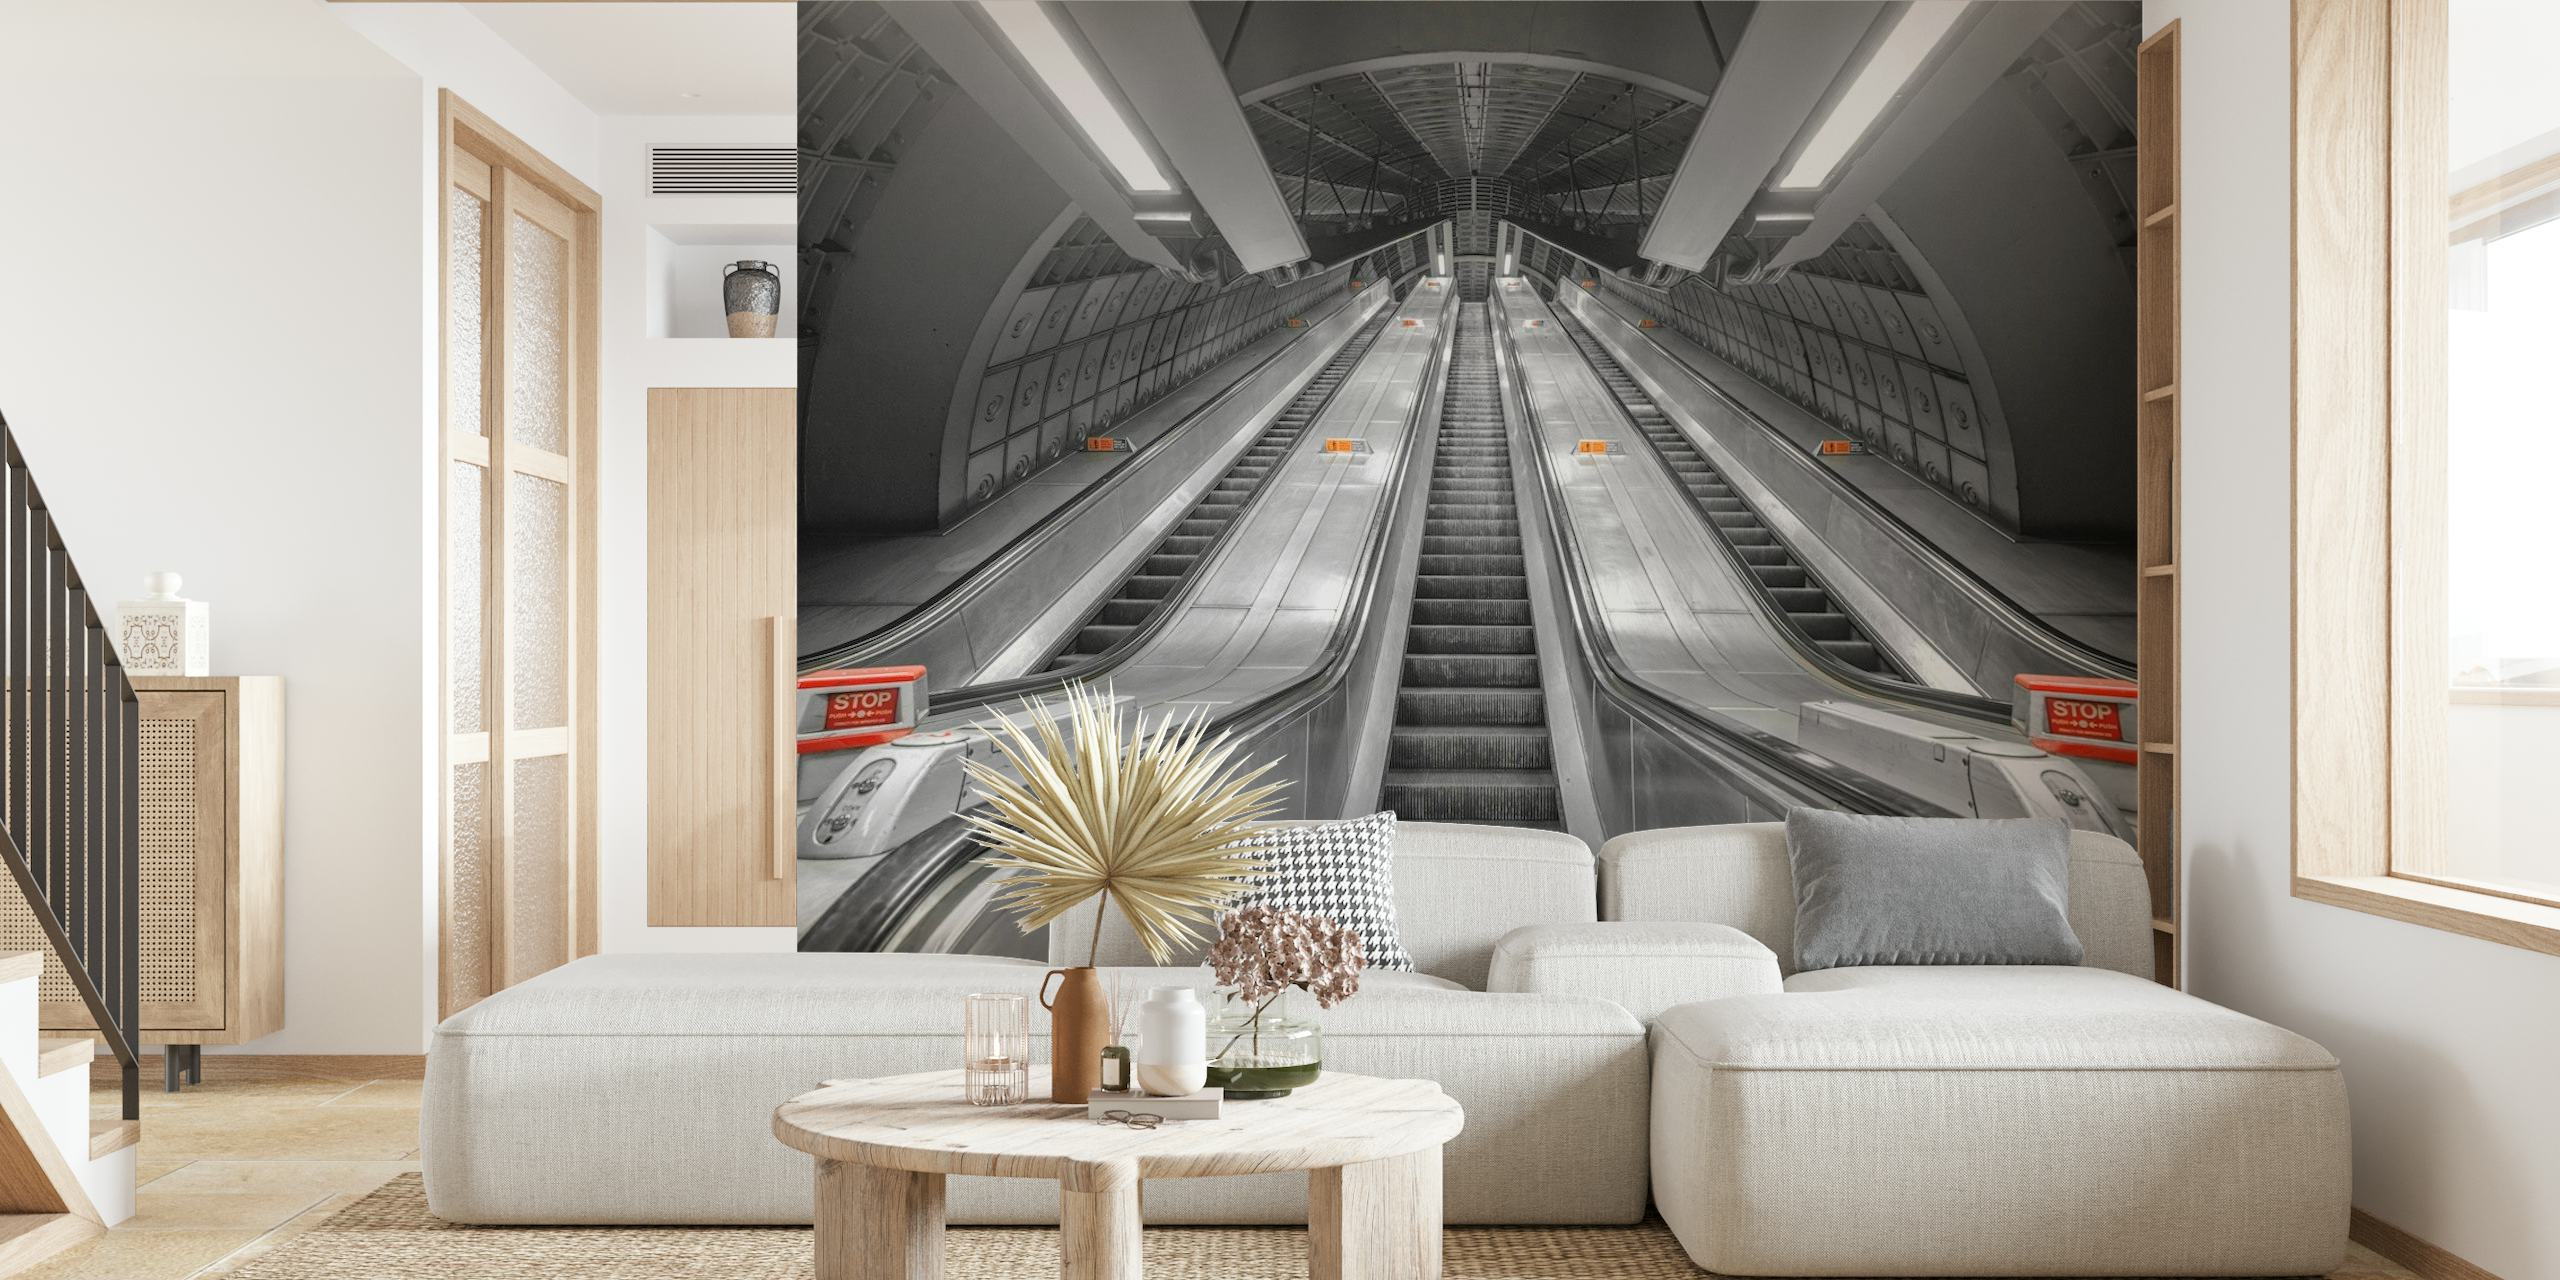 Black and white wall mural of subway escalators leading upwards in a symmetrical pattern